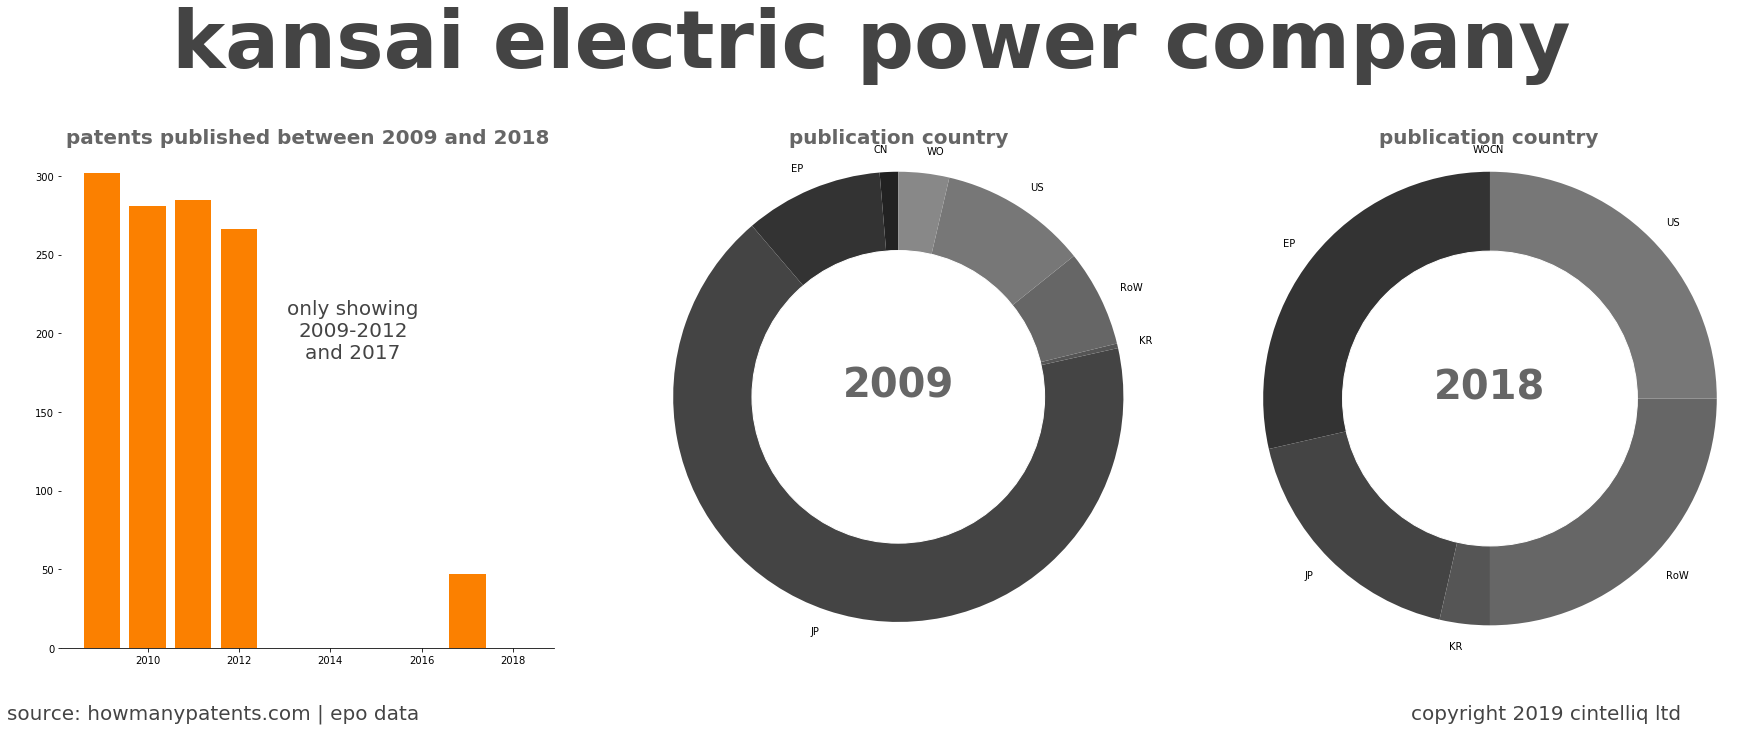 summary of patents for Kansai Electric Power Company